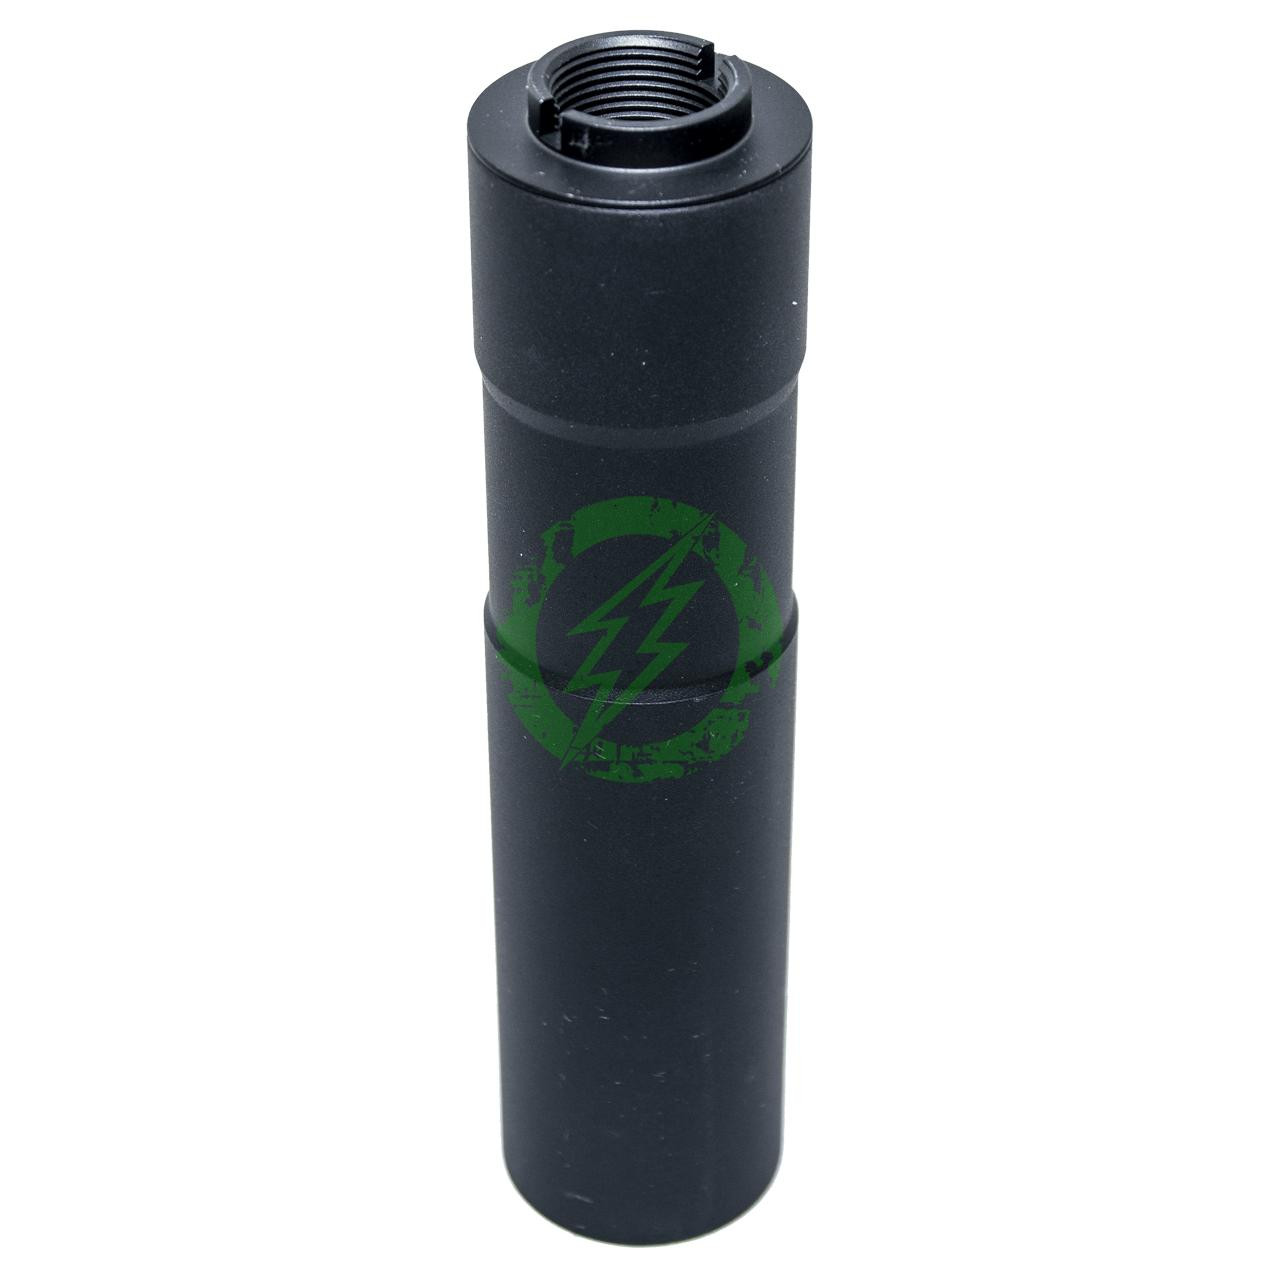  LCT Z-Series ZDTK-4 Mock Silencer for AK Series Airsoft Rifles 